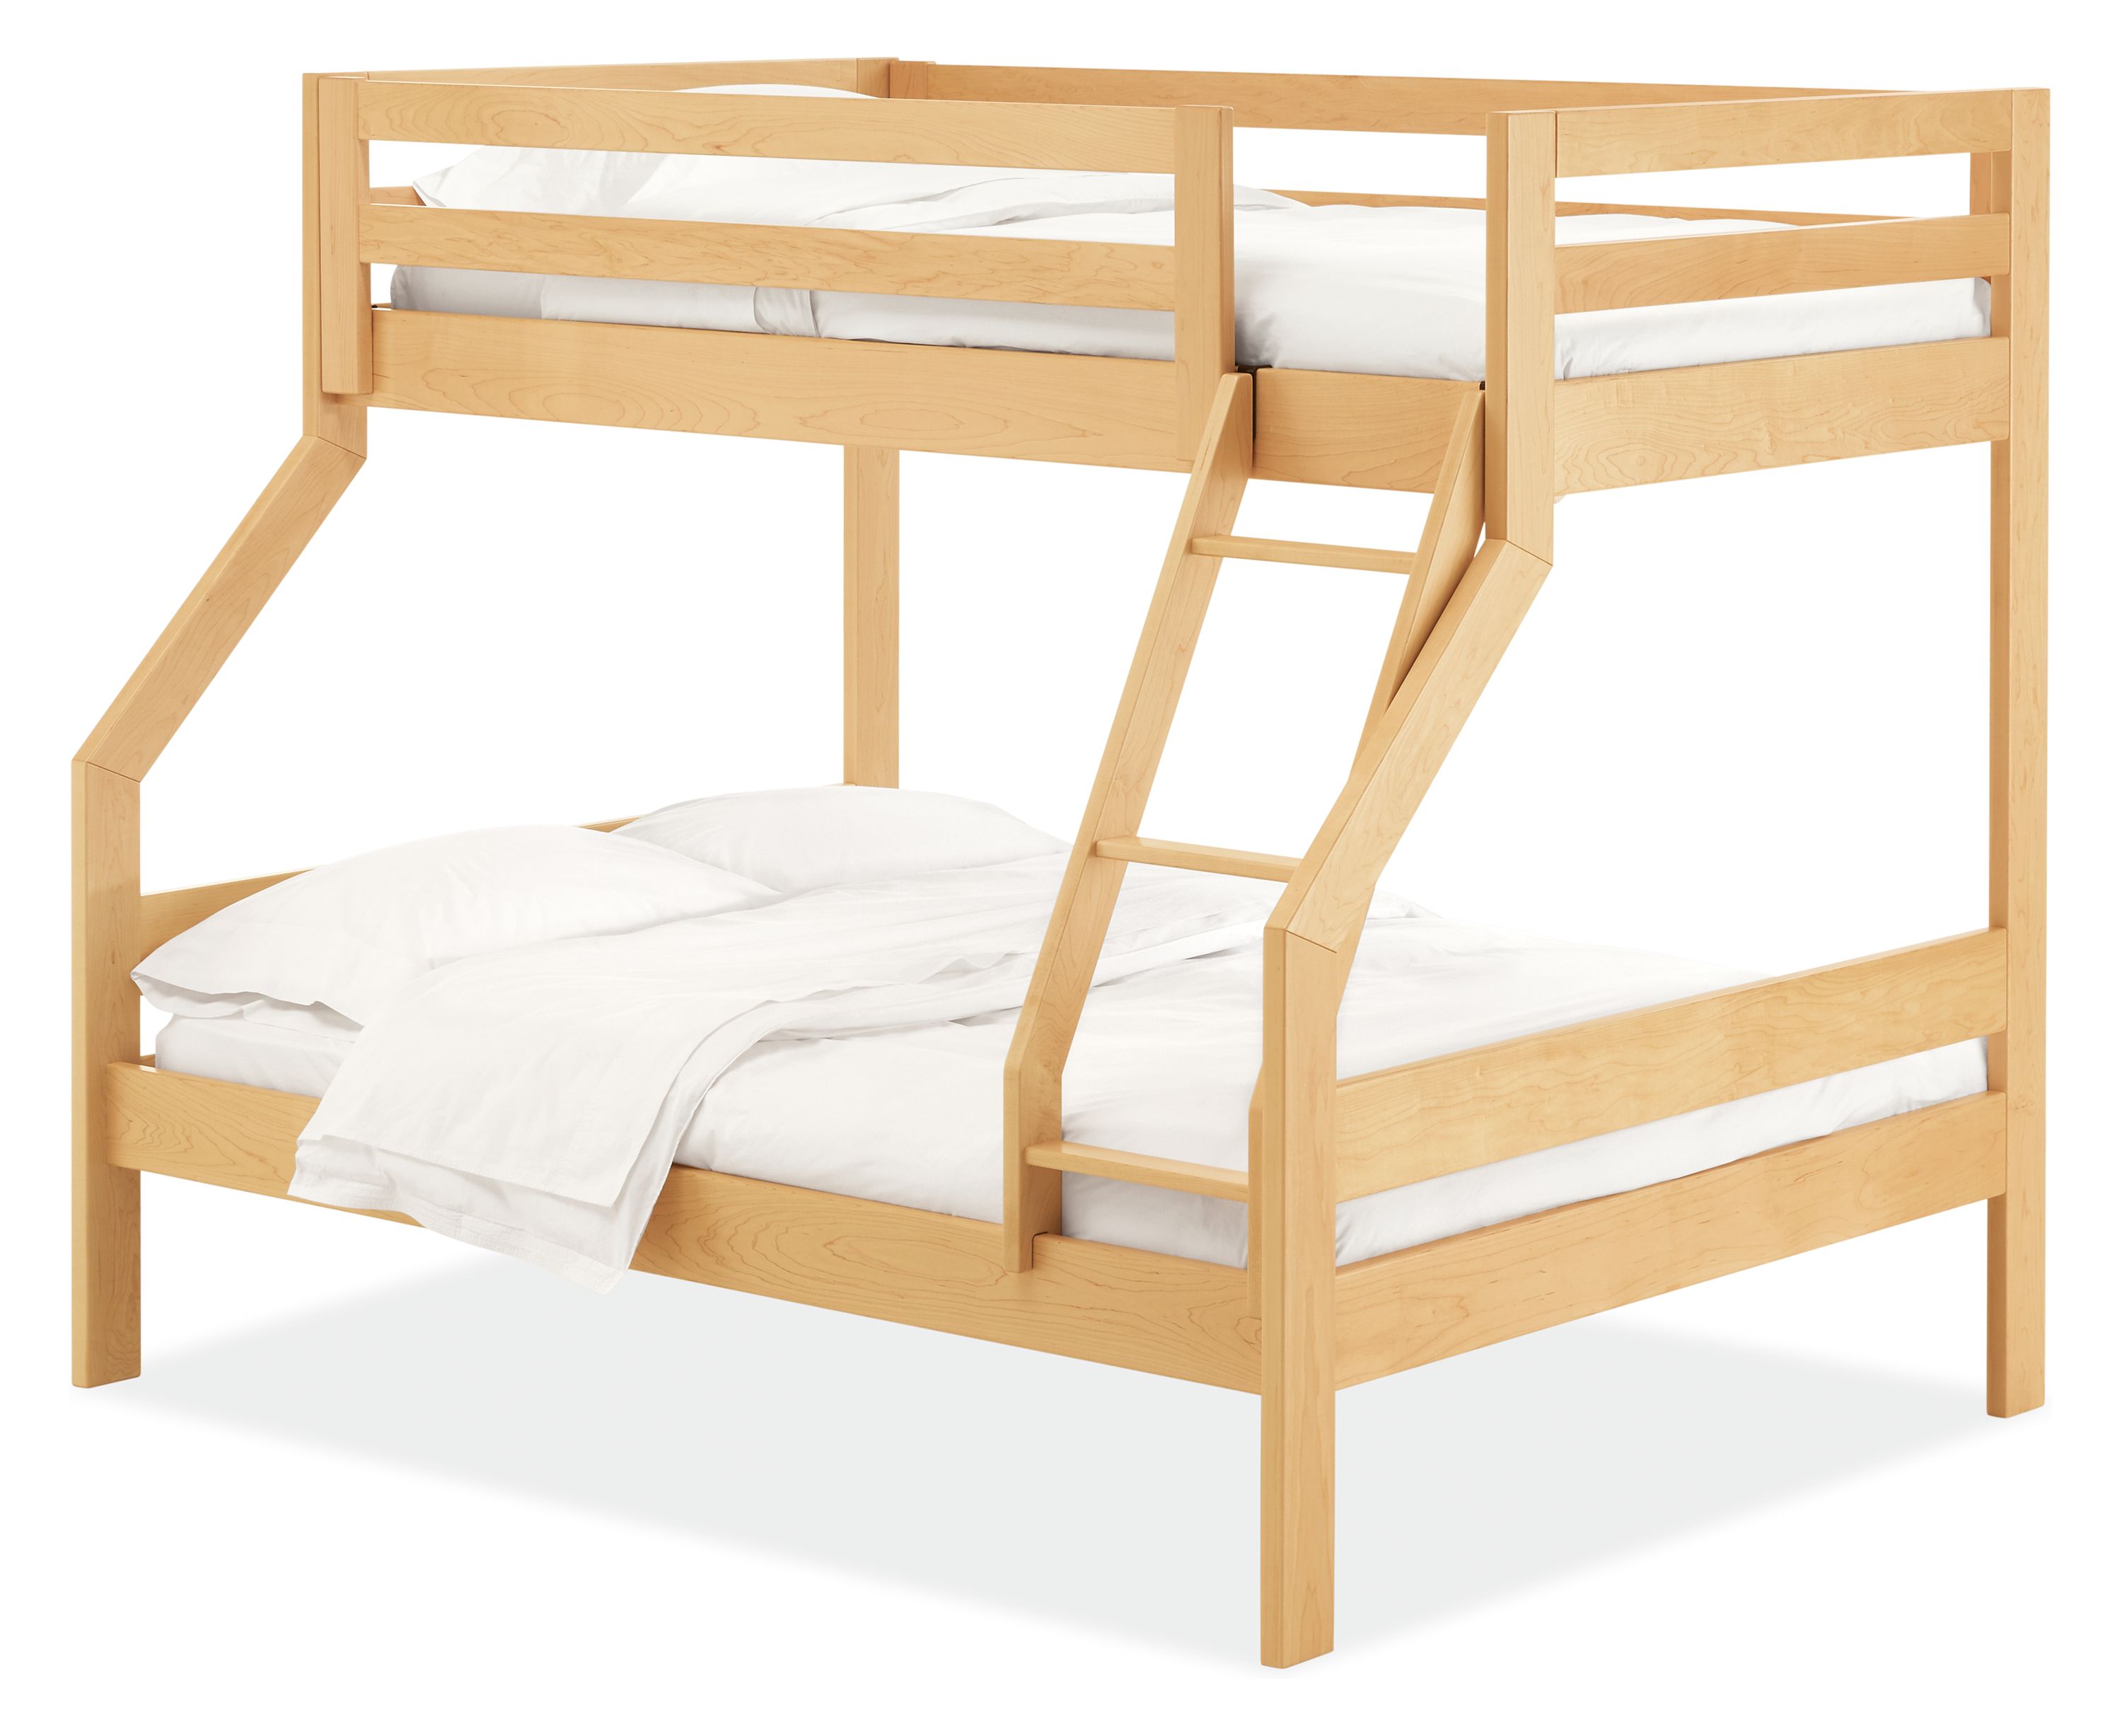 Waverly Bunk Bed Twin Over Full, Bunk Bed Wall Units